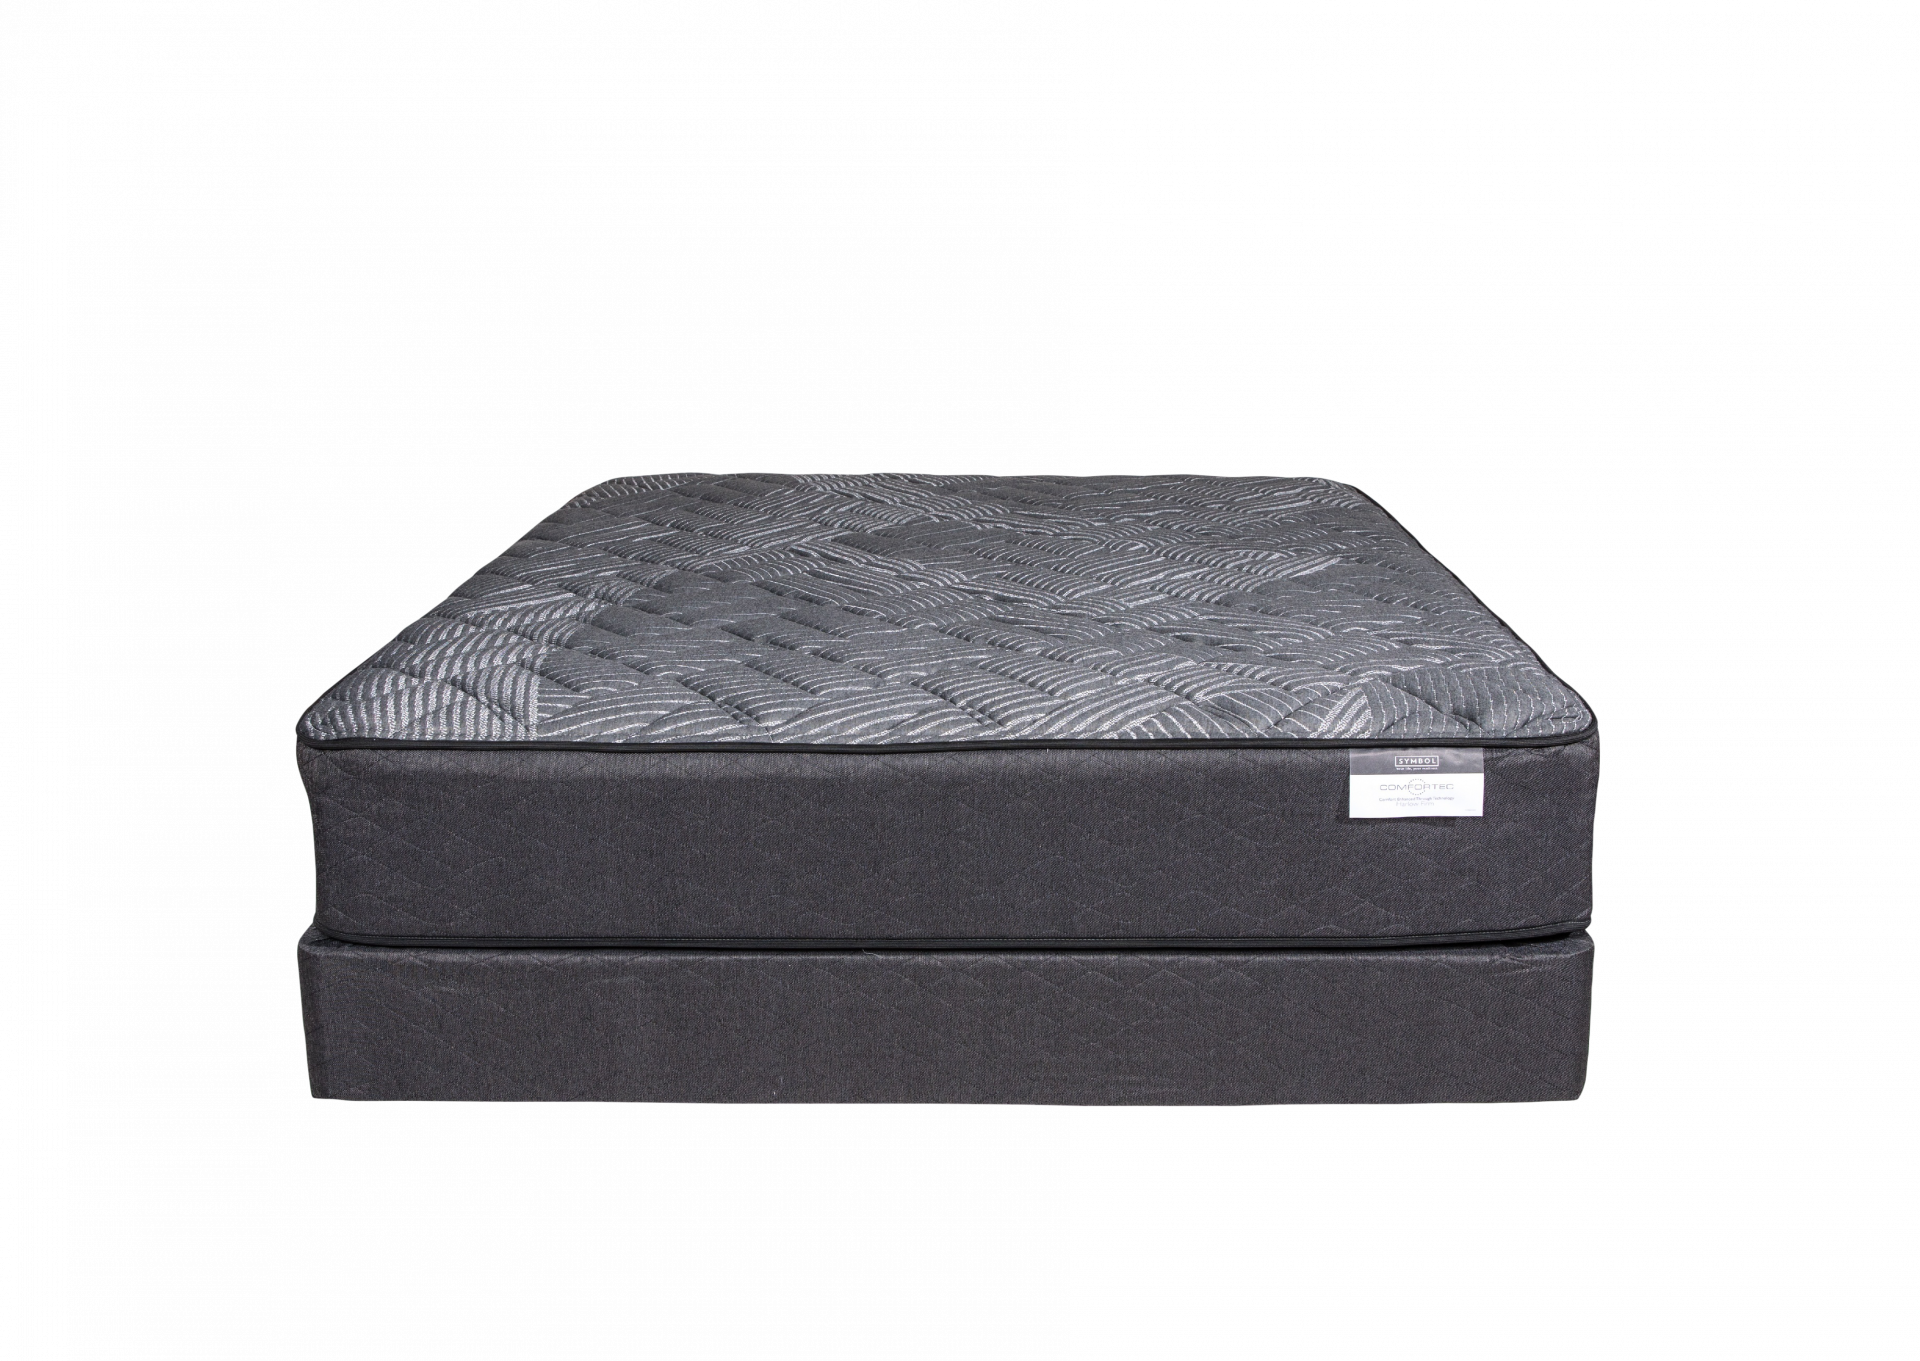 Harlow Firm Cali King size mattress set by Symbol Mattress,Symbol Mattress